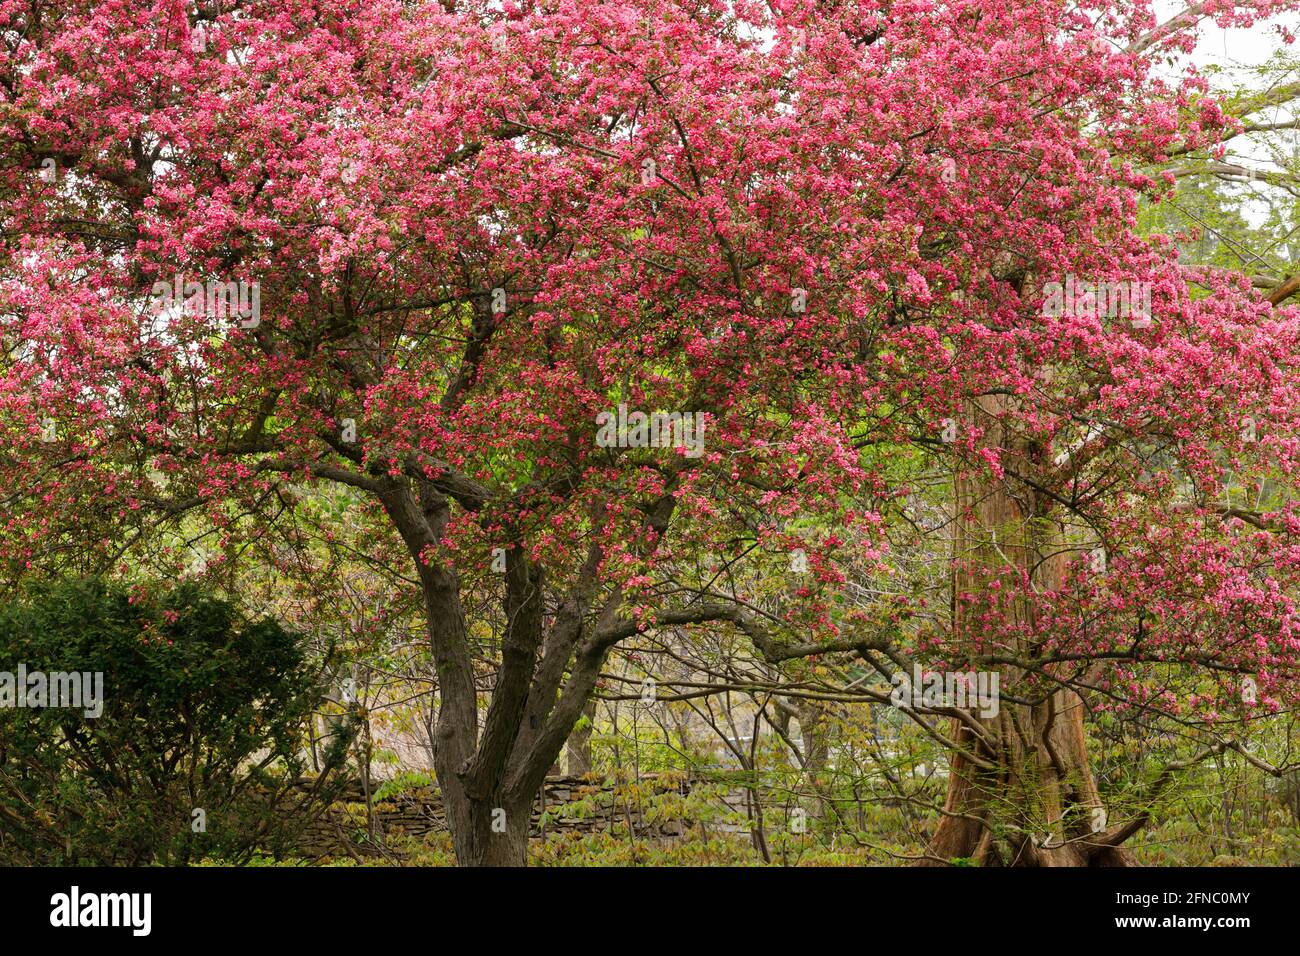 Canada, Ontario, Niagara Falls, School of Horticulture. Flowering crabapple in spring. Crabapples are popular as compact ornamental trees, providing b Stock Photo